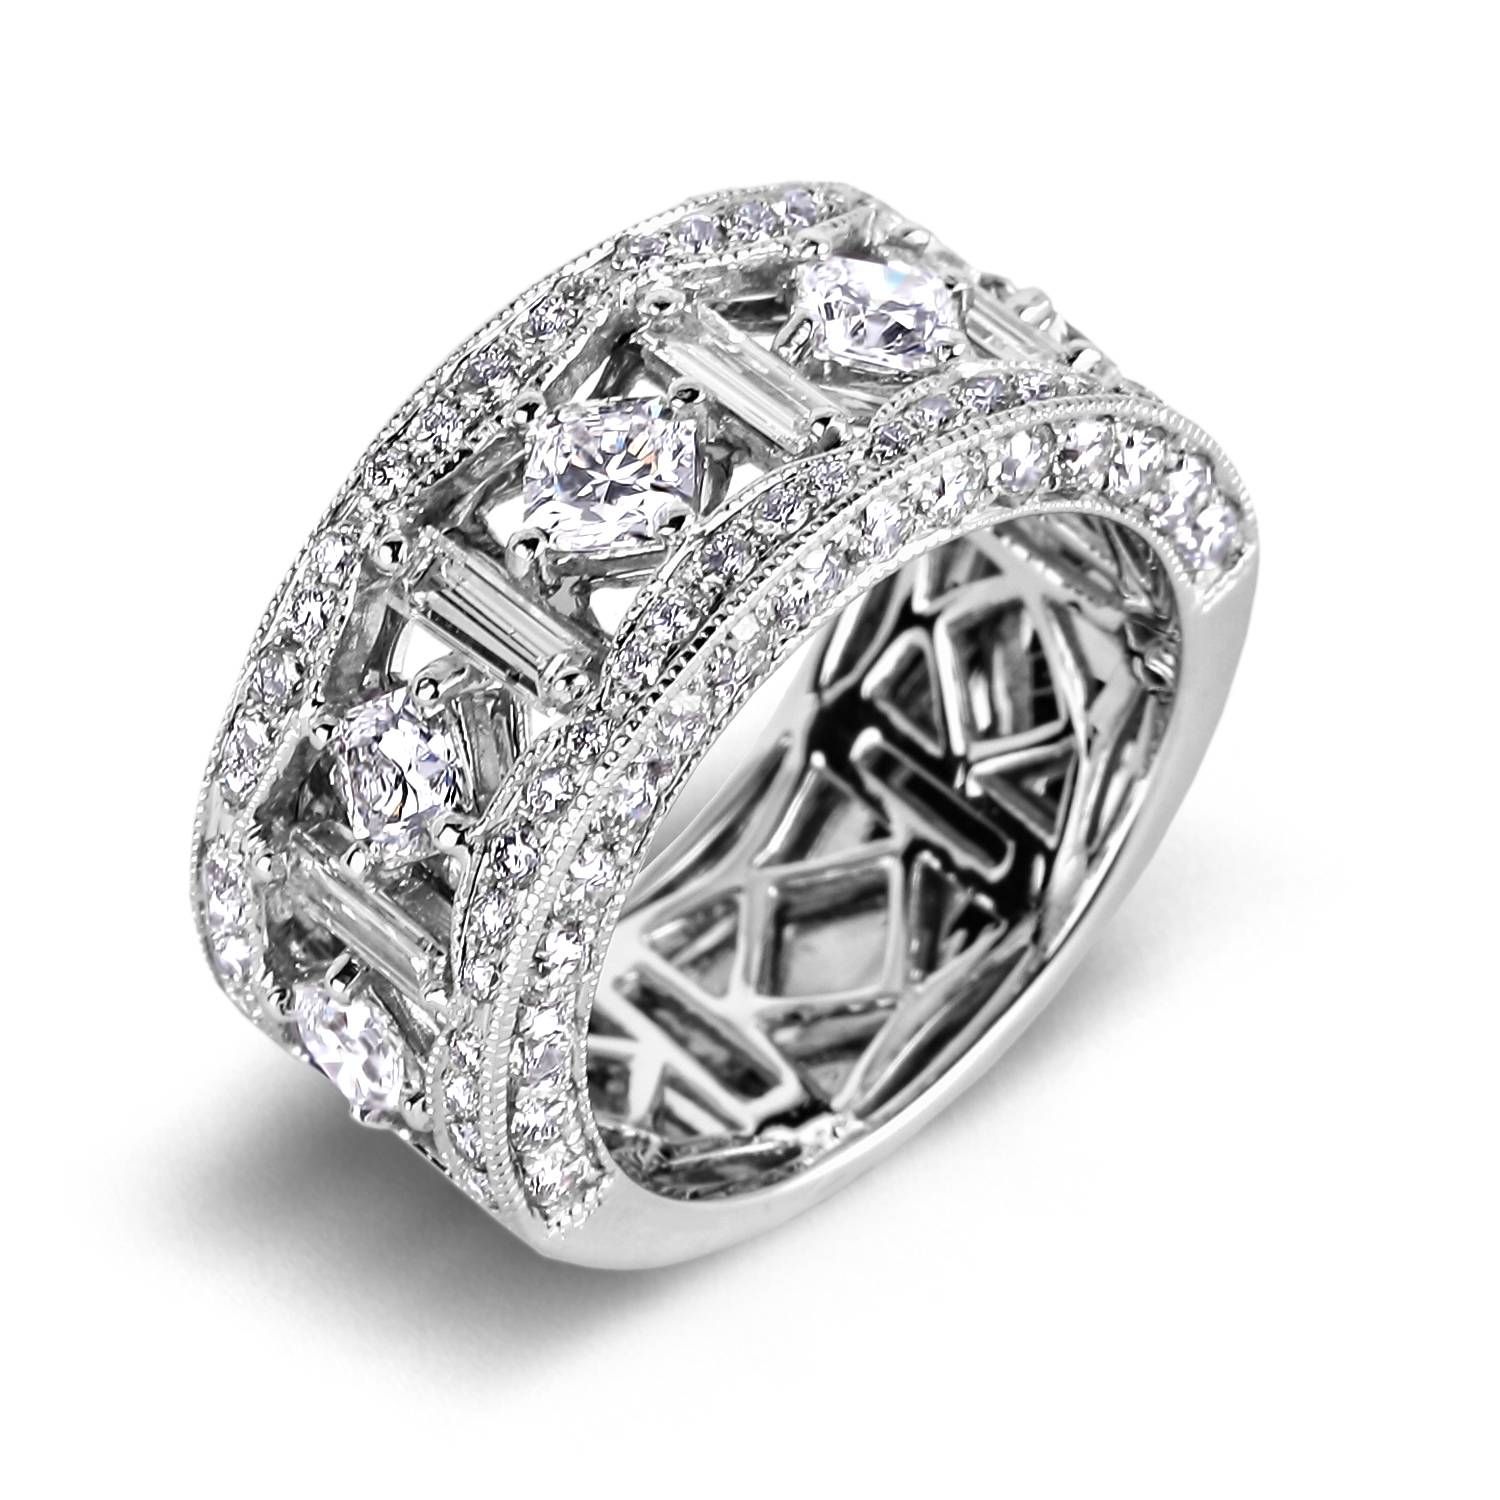 17+ Images About 10 Year Anniversary Rings On Pinterest | White Within Most Up To Date 10 Year Diamond Anniversary Rings (View 2 of 15)